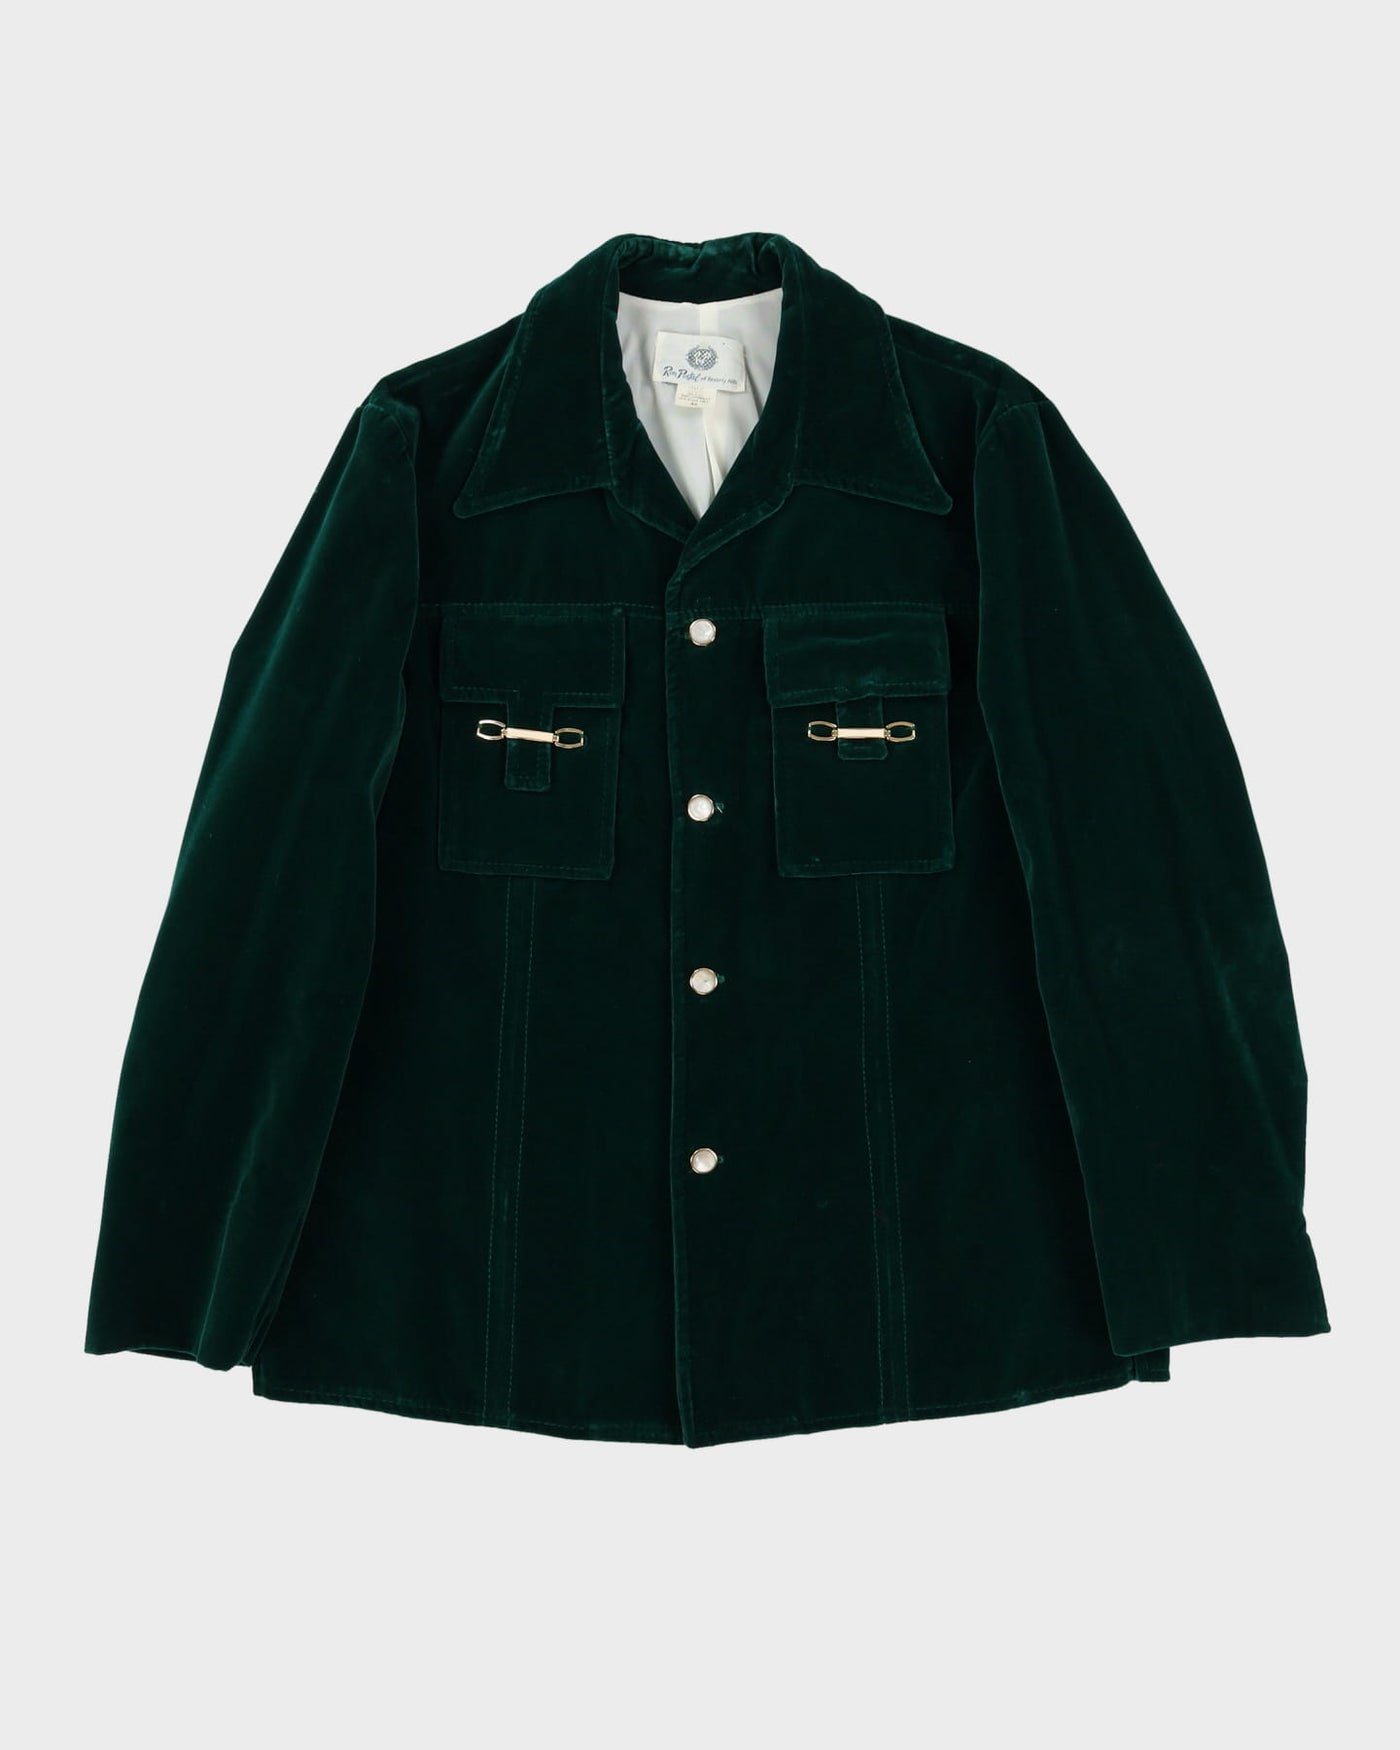 1970s Green Jacket And Trouser Suit - XL